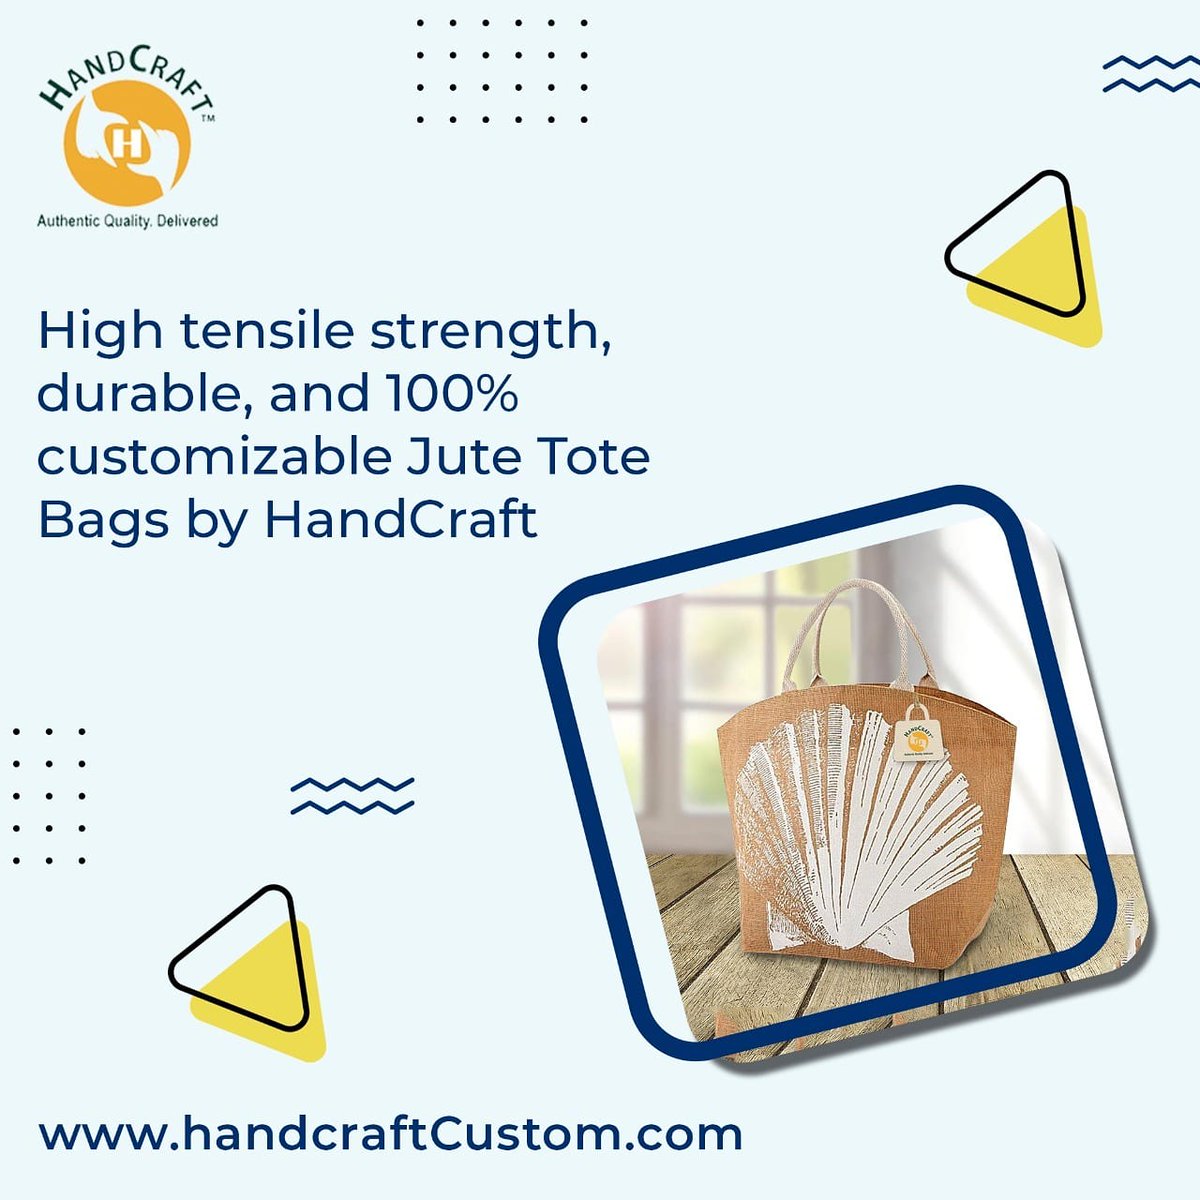 Available in various colours, sizes and designs, HandCraft's Jute Tote Bags are the perfect biodegradable and sustainable product for your company's promotional and branding activities.
Head to handcraftcustom.com/jute-tote-bags/ for more details.
#jutebag #jutetotebag #durable #customisable